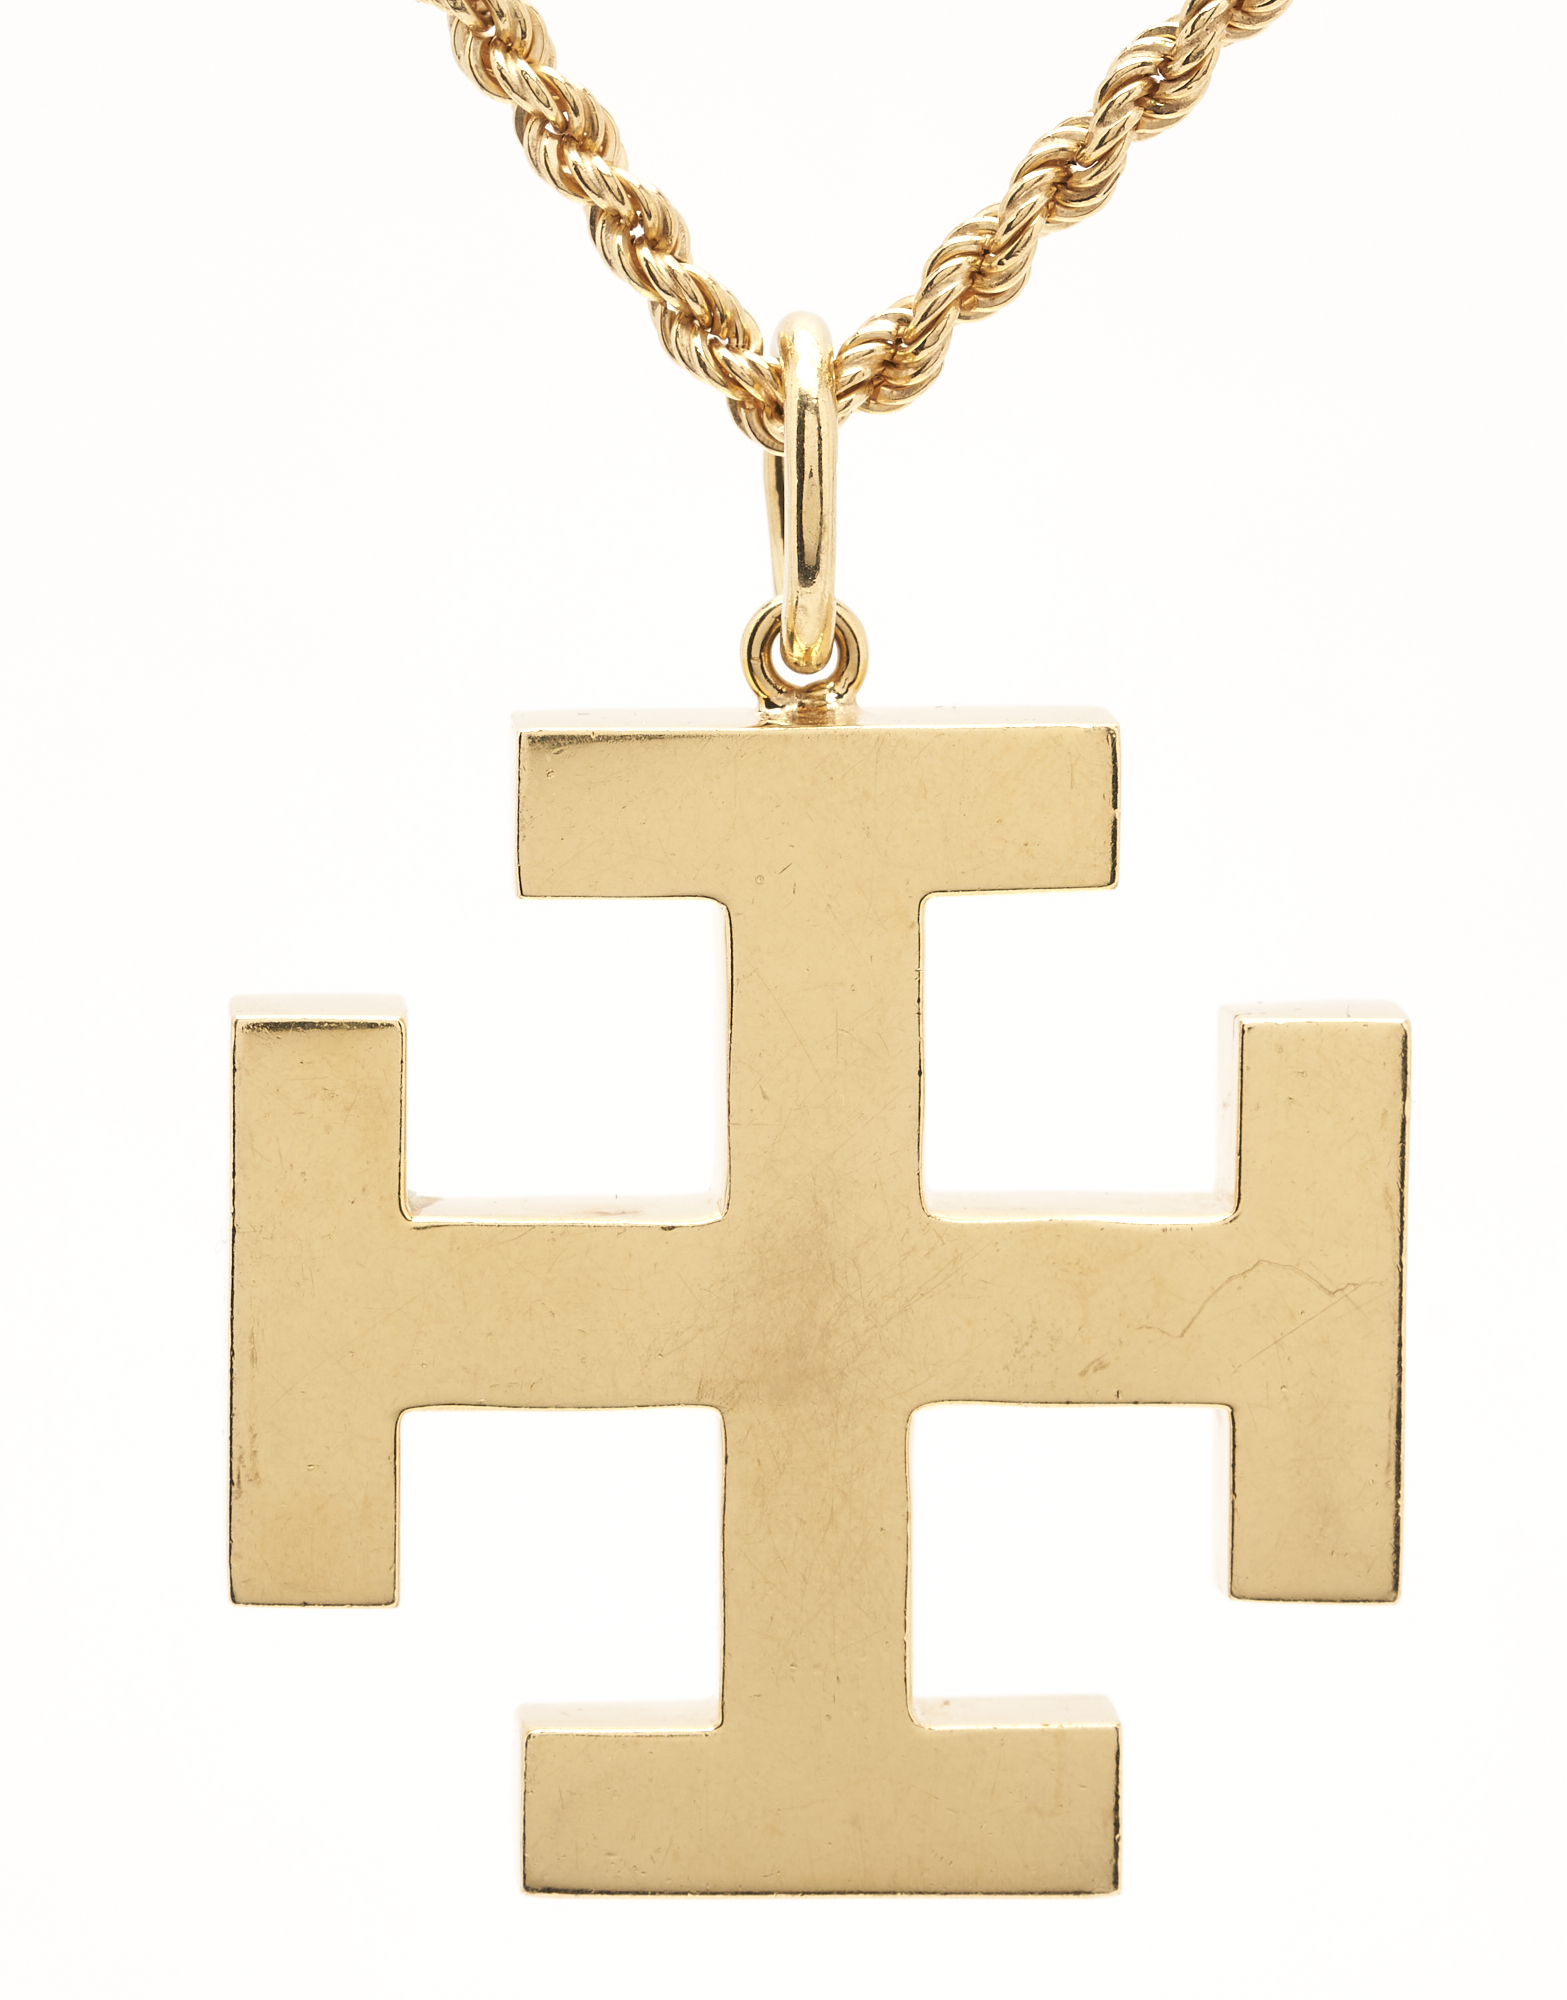 18 KARAT GOLD NECKLACE, TIFFANY & CO., WITH A RUSSIAN ORTHODOX CROSS PENDANT  The openwork gold chain spaced w… | 18 karat gold necklace, Ancient jewelry,  Pendant